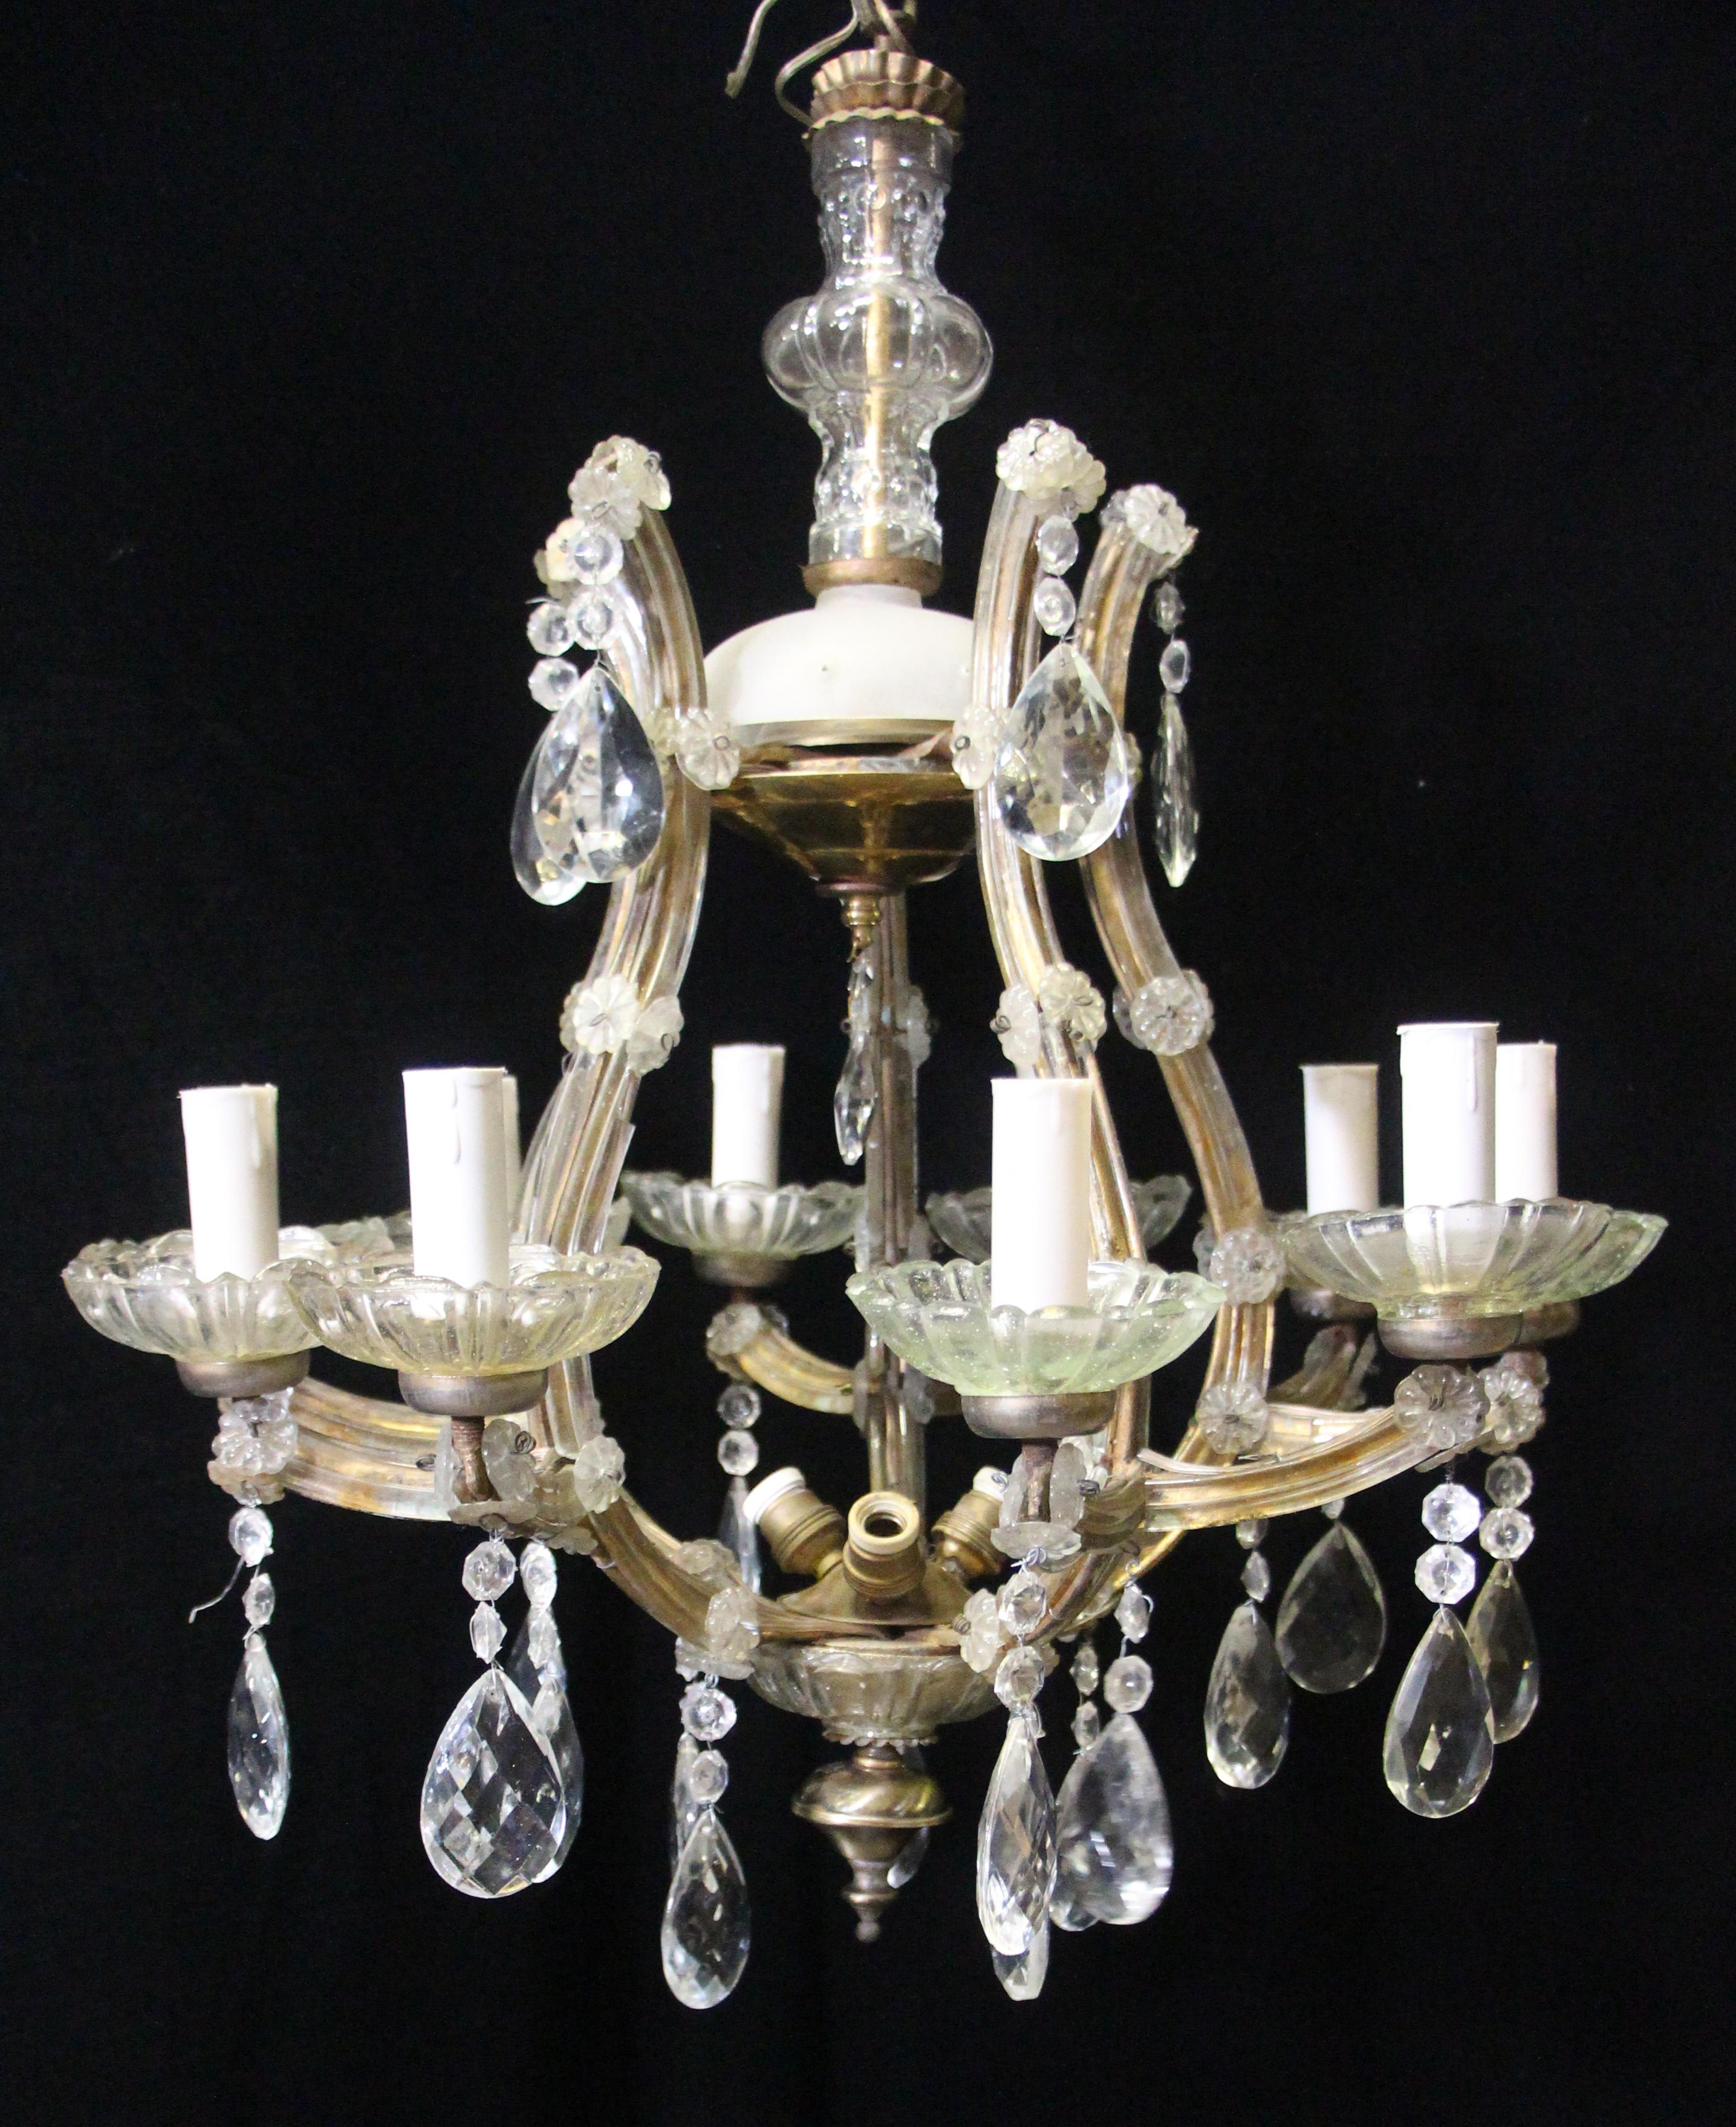 Elegant small petite Marie Therese clear crystal antique chandelier with 10 arms and 13 lights. Including three center sockets. Price includes restoration, chain and canopy. This can be seen at our 400 Gilligan St location in Scranton, PA.